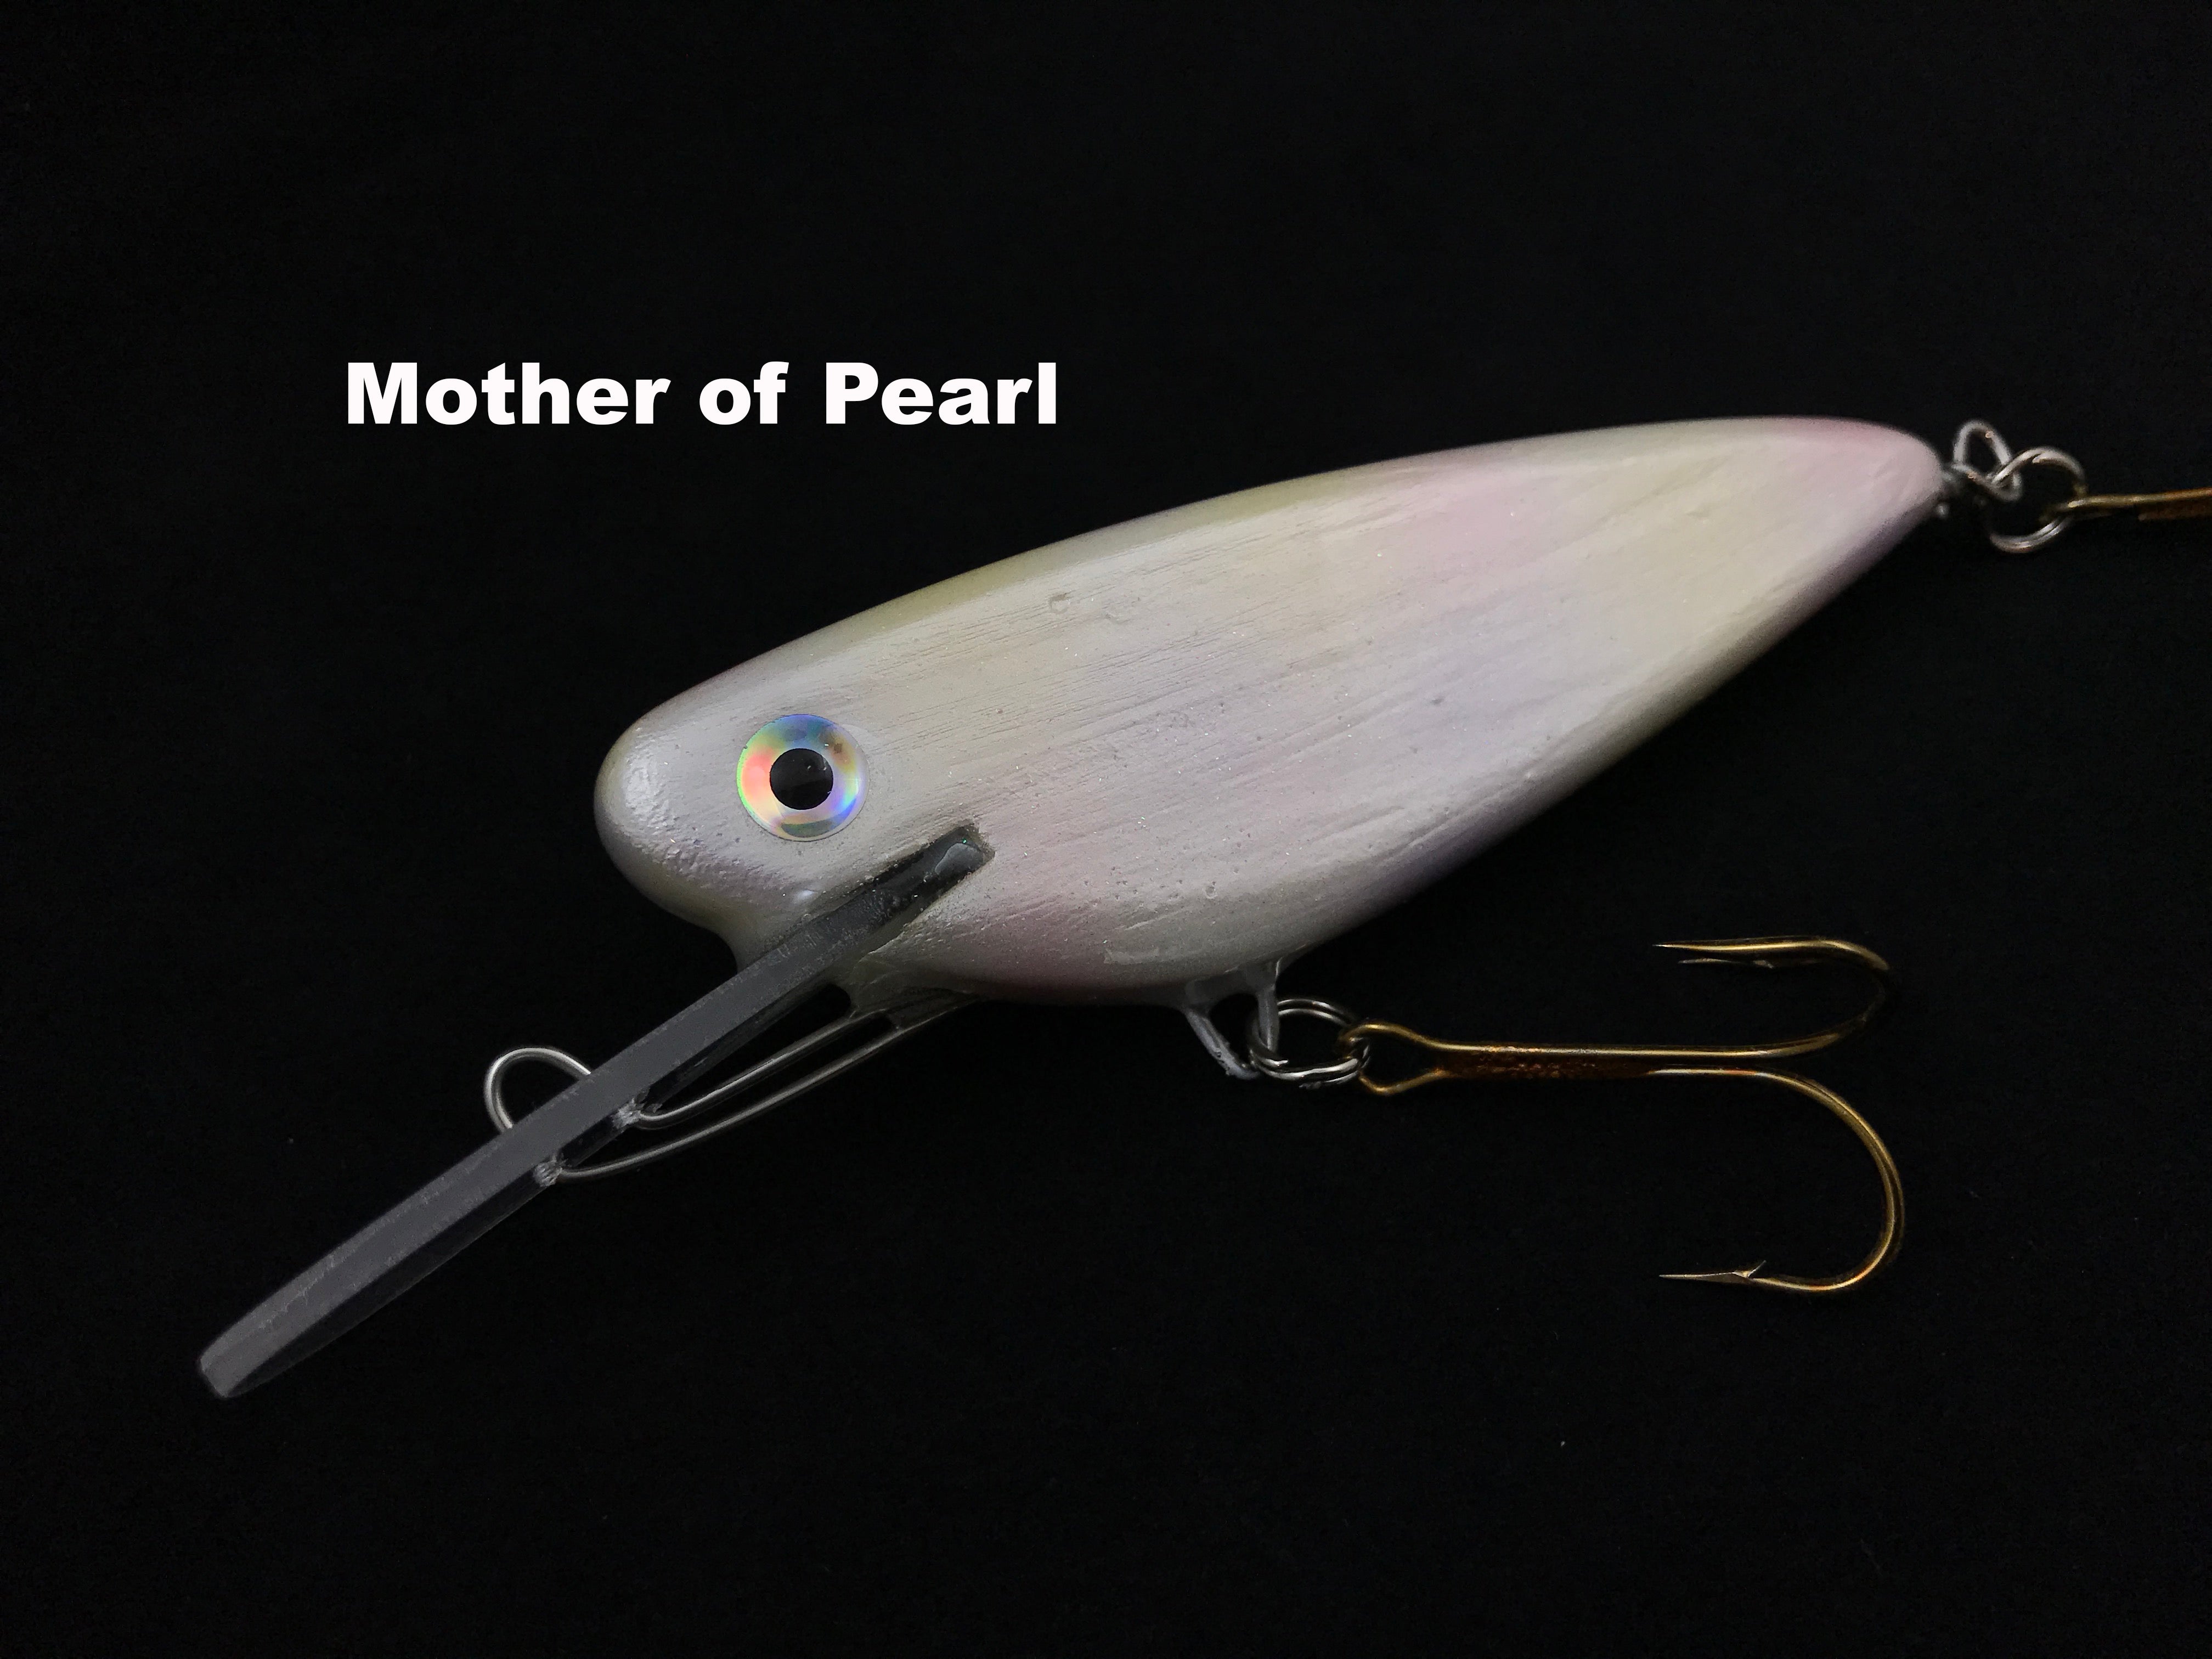 The Realis Versa Shad Fat 5” has been producing quality fish